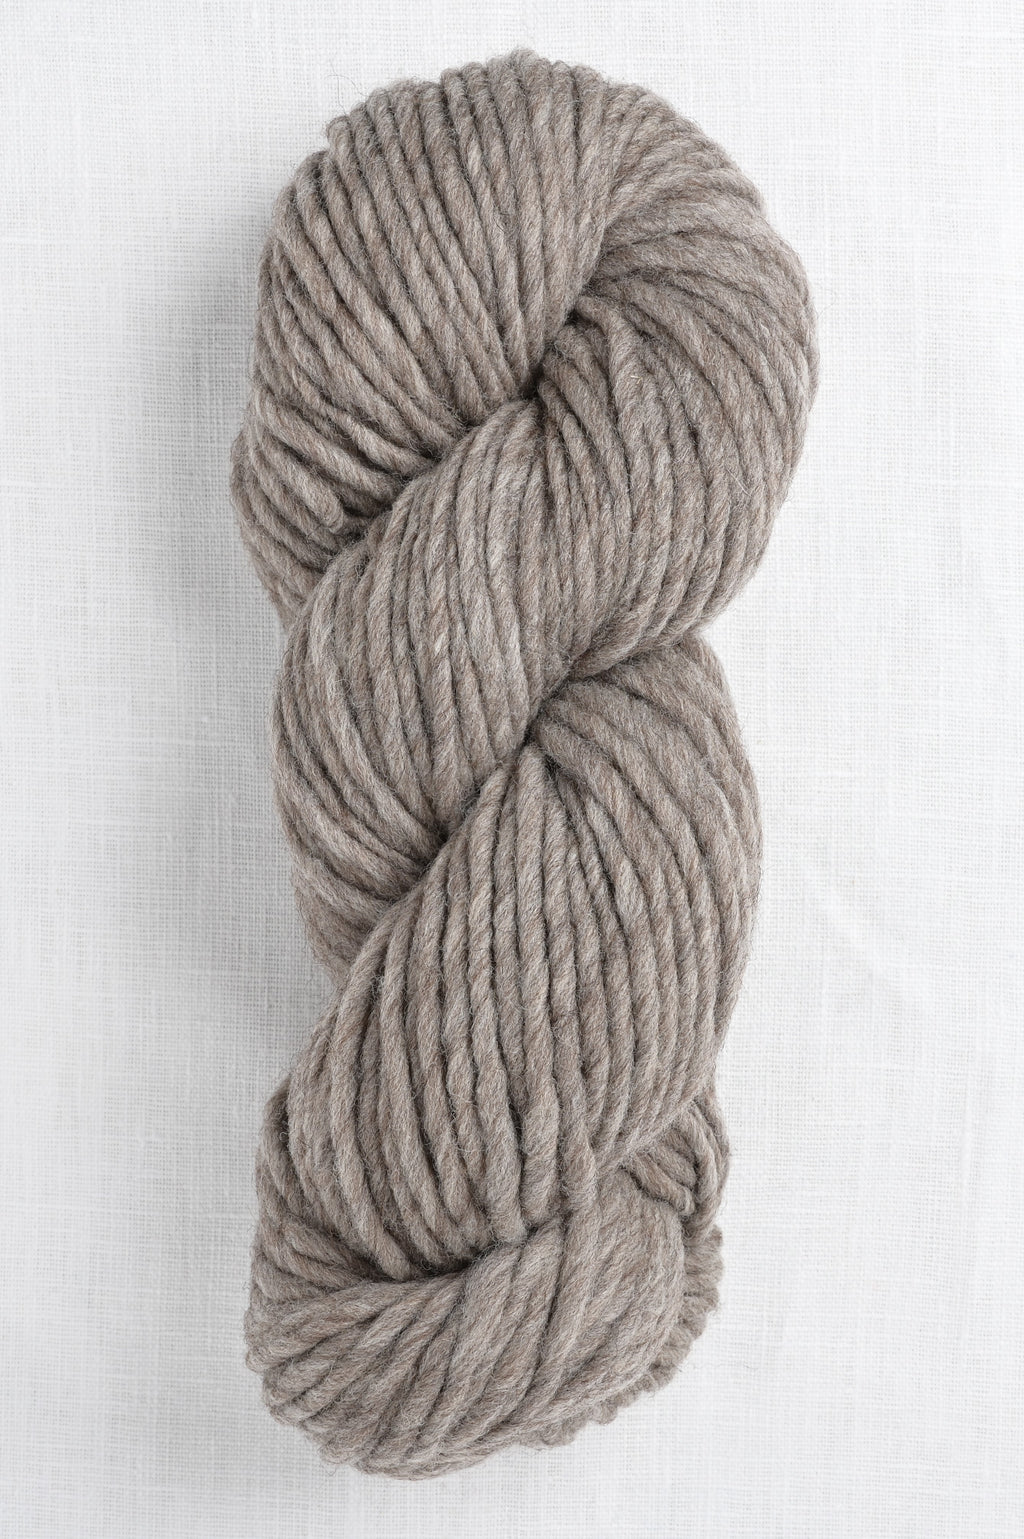 Quince & Co. Puffin 155 Caspian (undyed heather)